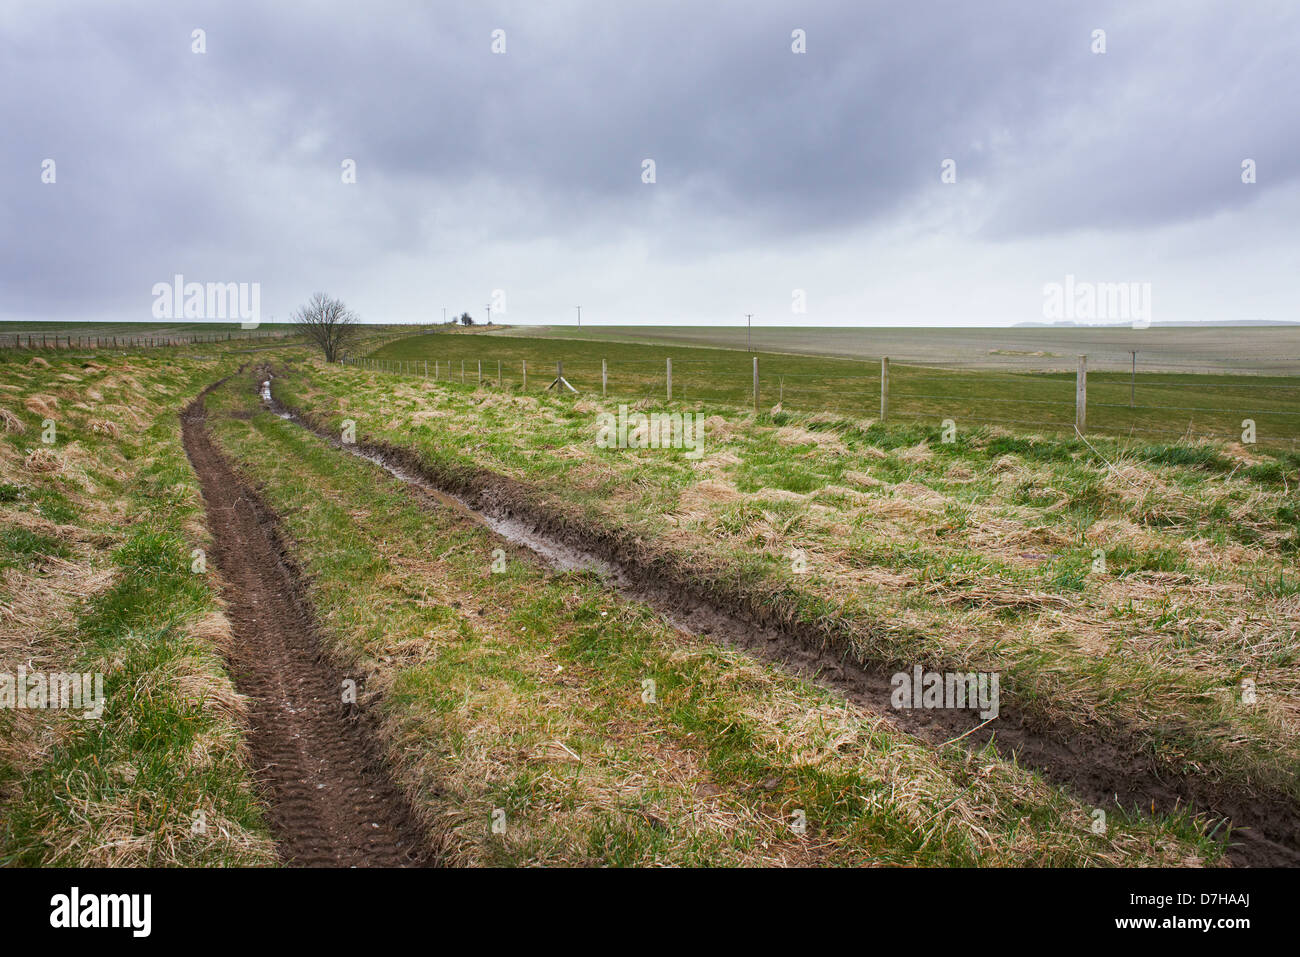 A country track with open fields and overcast sky Stock Photo